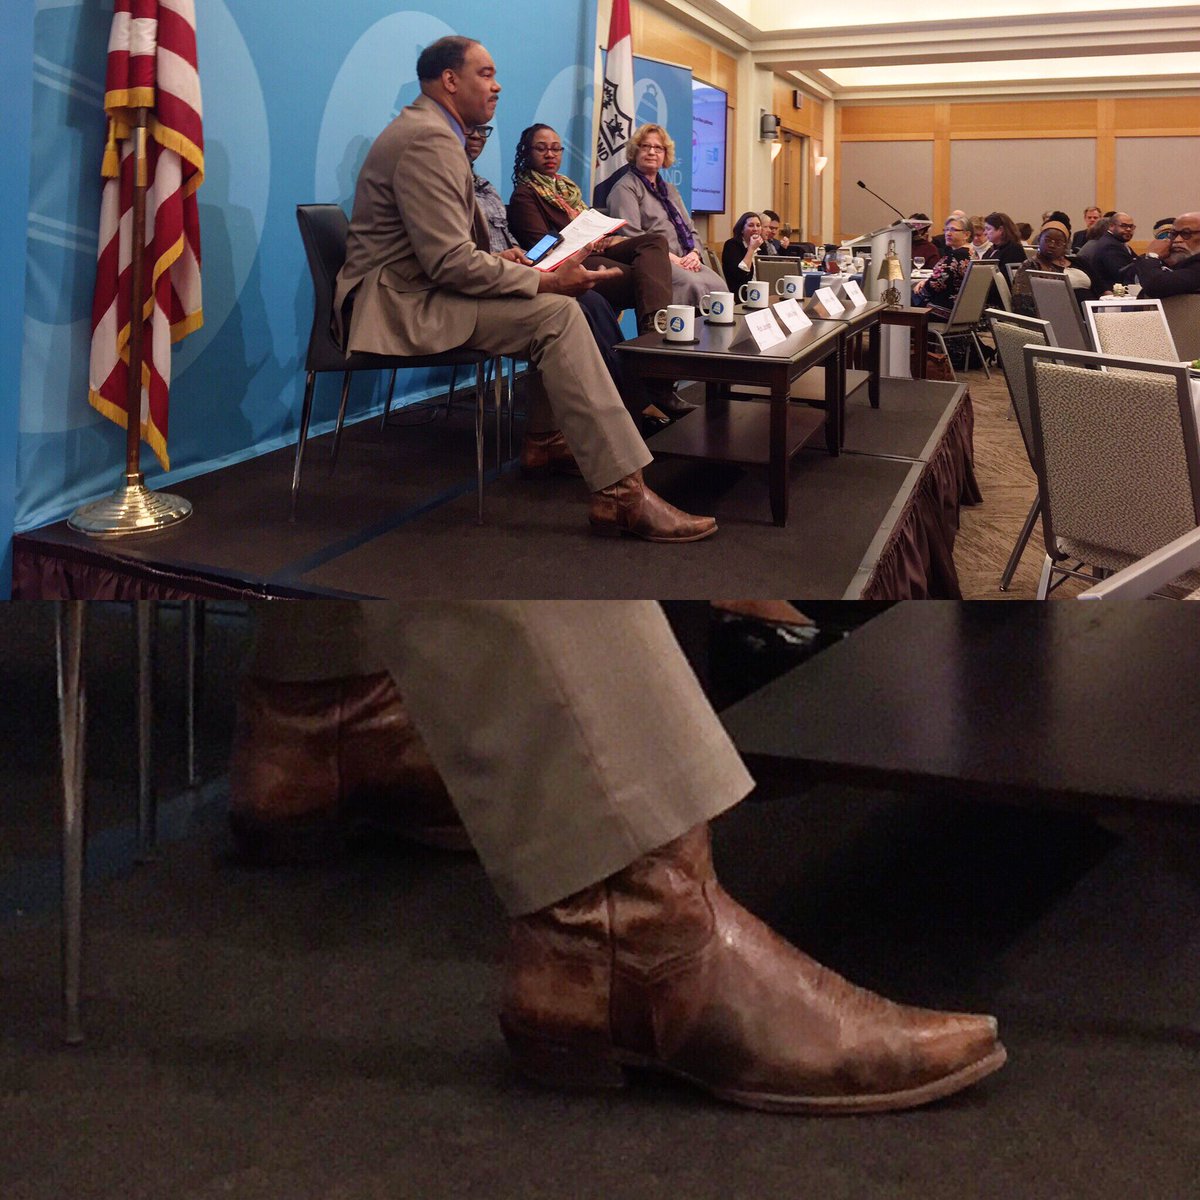 Looking forward to today’s @TheCityClub panel discussion. And I’m already impressed by Rick Jackson’s boots. 🌳 😻 #MoreGreenLessWhite #Diversity #EnvironmentalMovement #TheCityClub #CLE